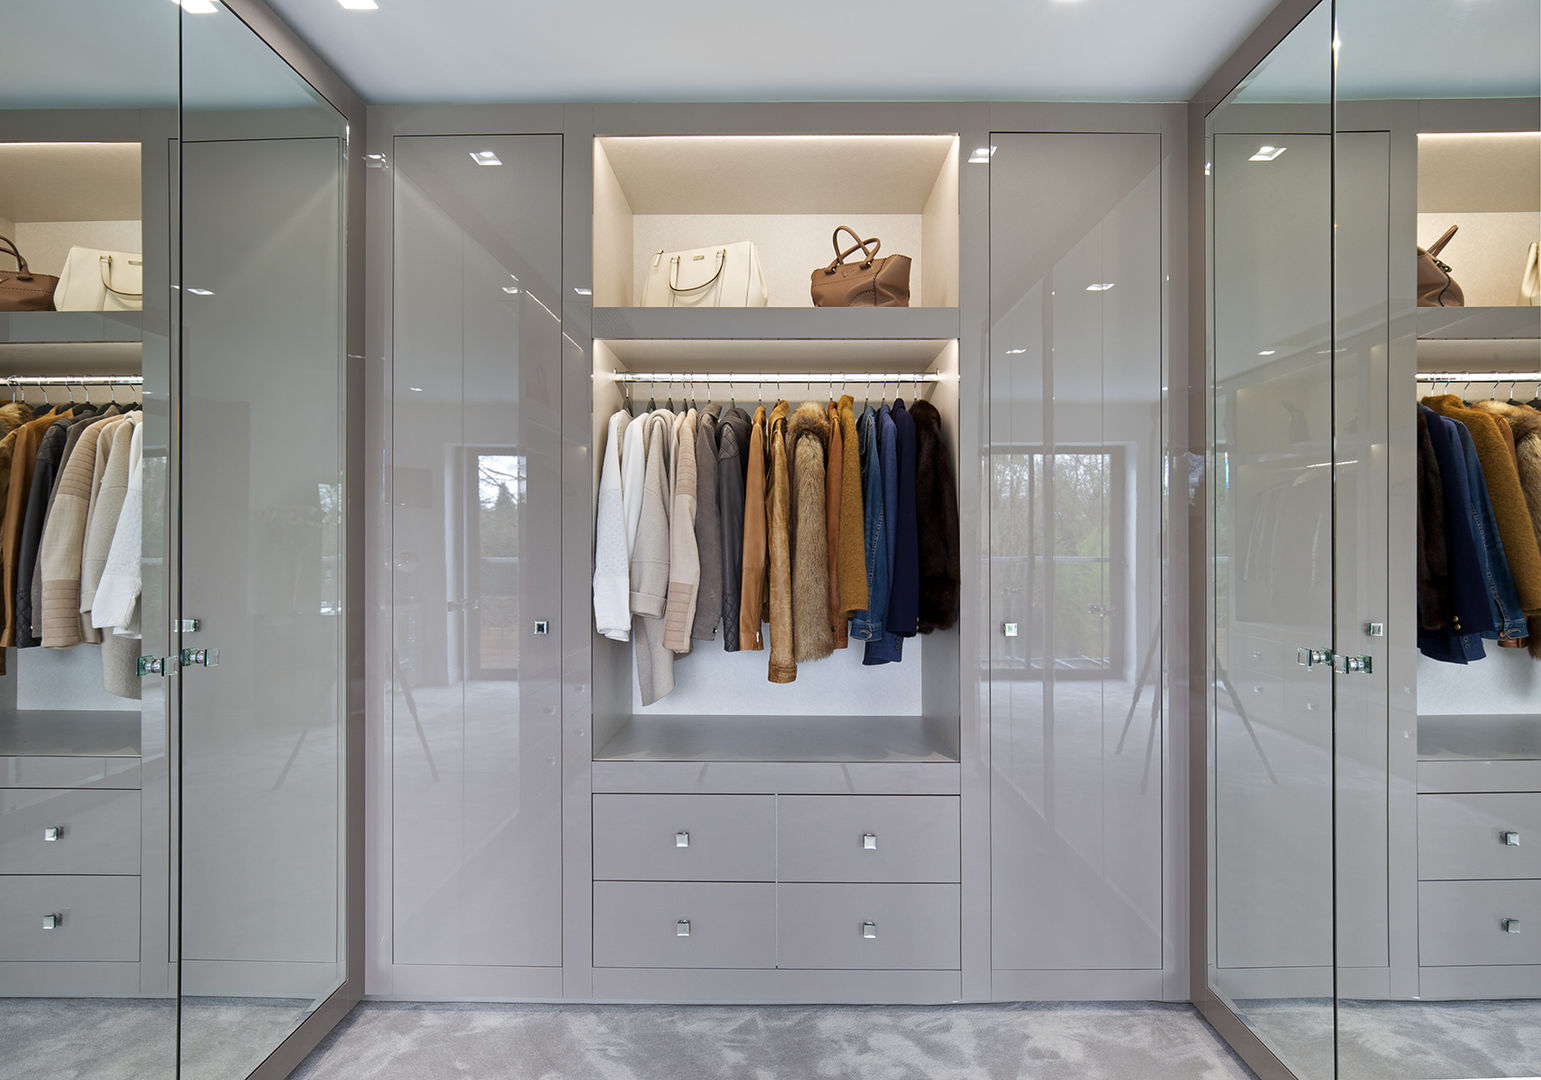 Mulberry, The Wood Works The Wood Works Modern style dressing rooms Glass